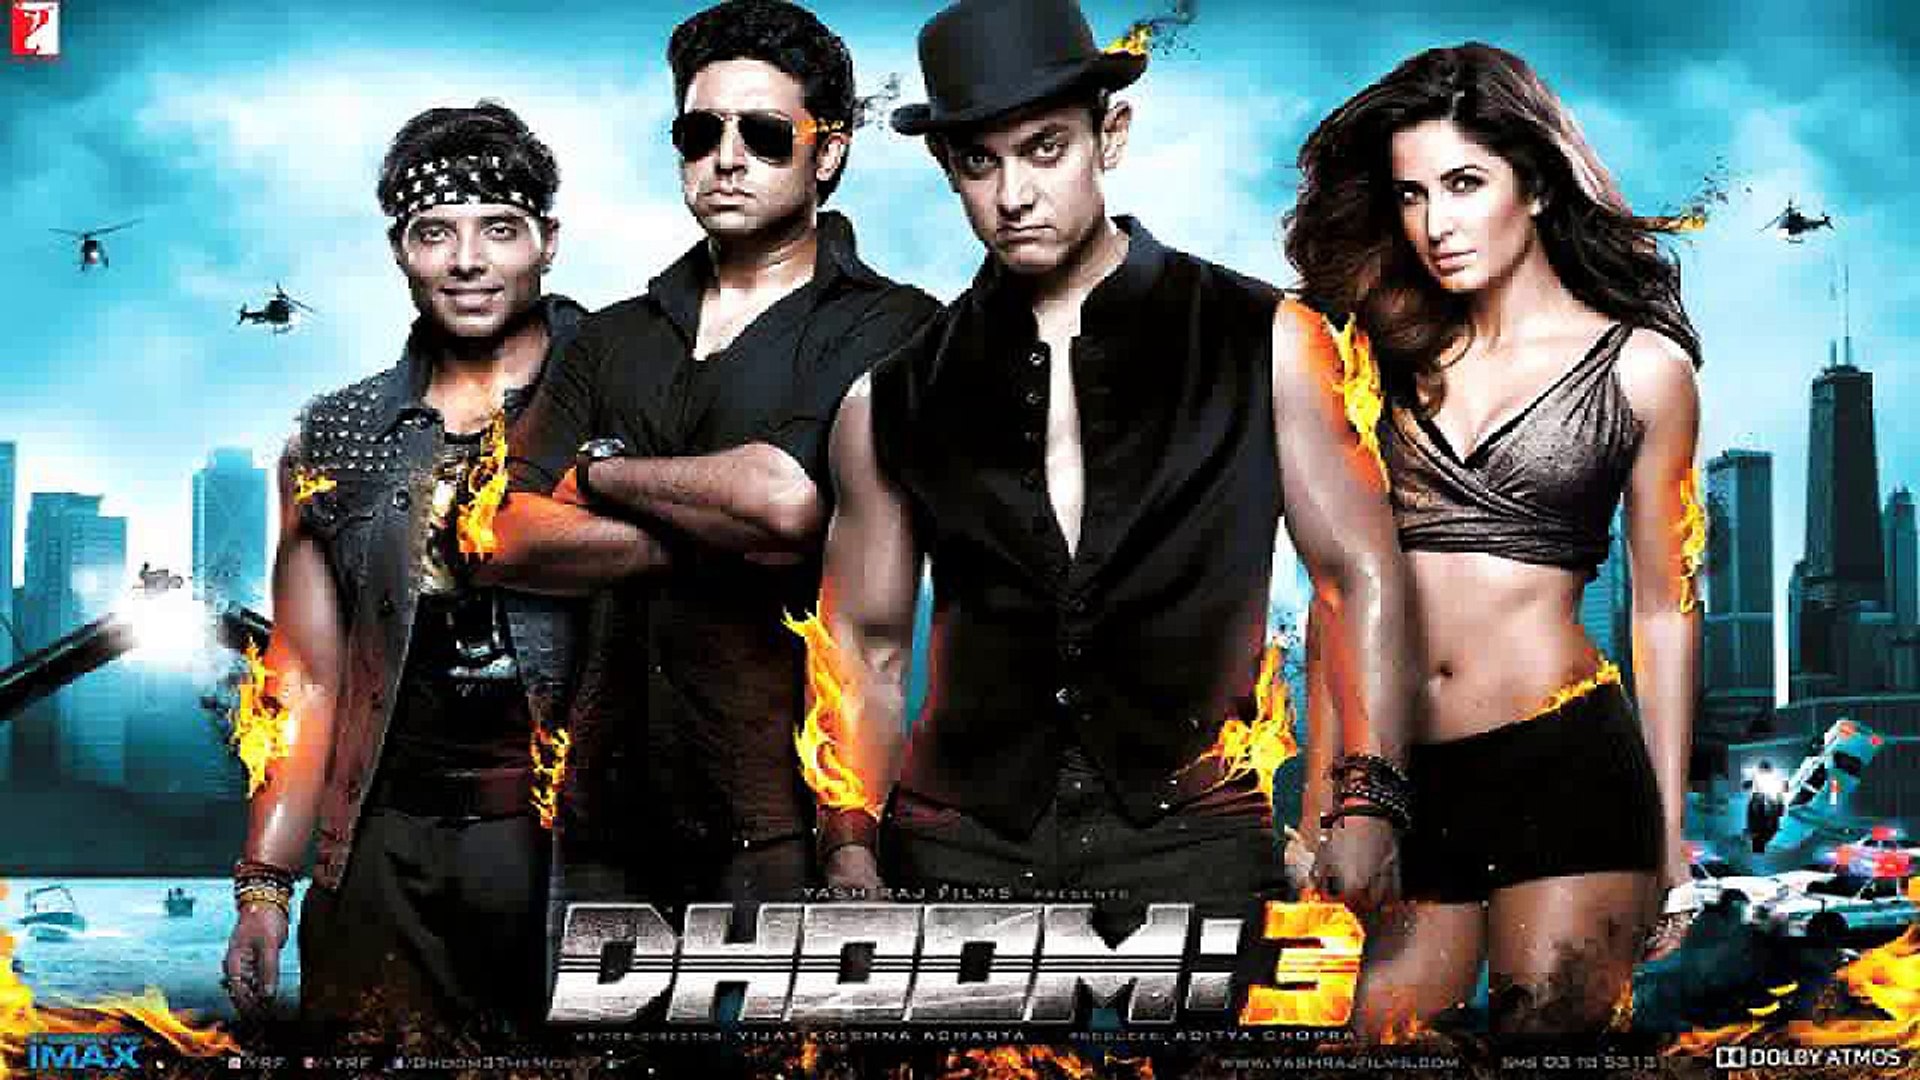 Download full movie dhoom 3 subtitle indonesia free